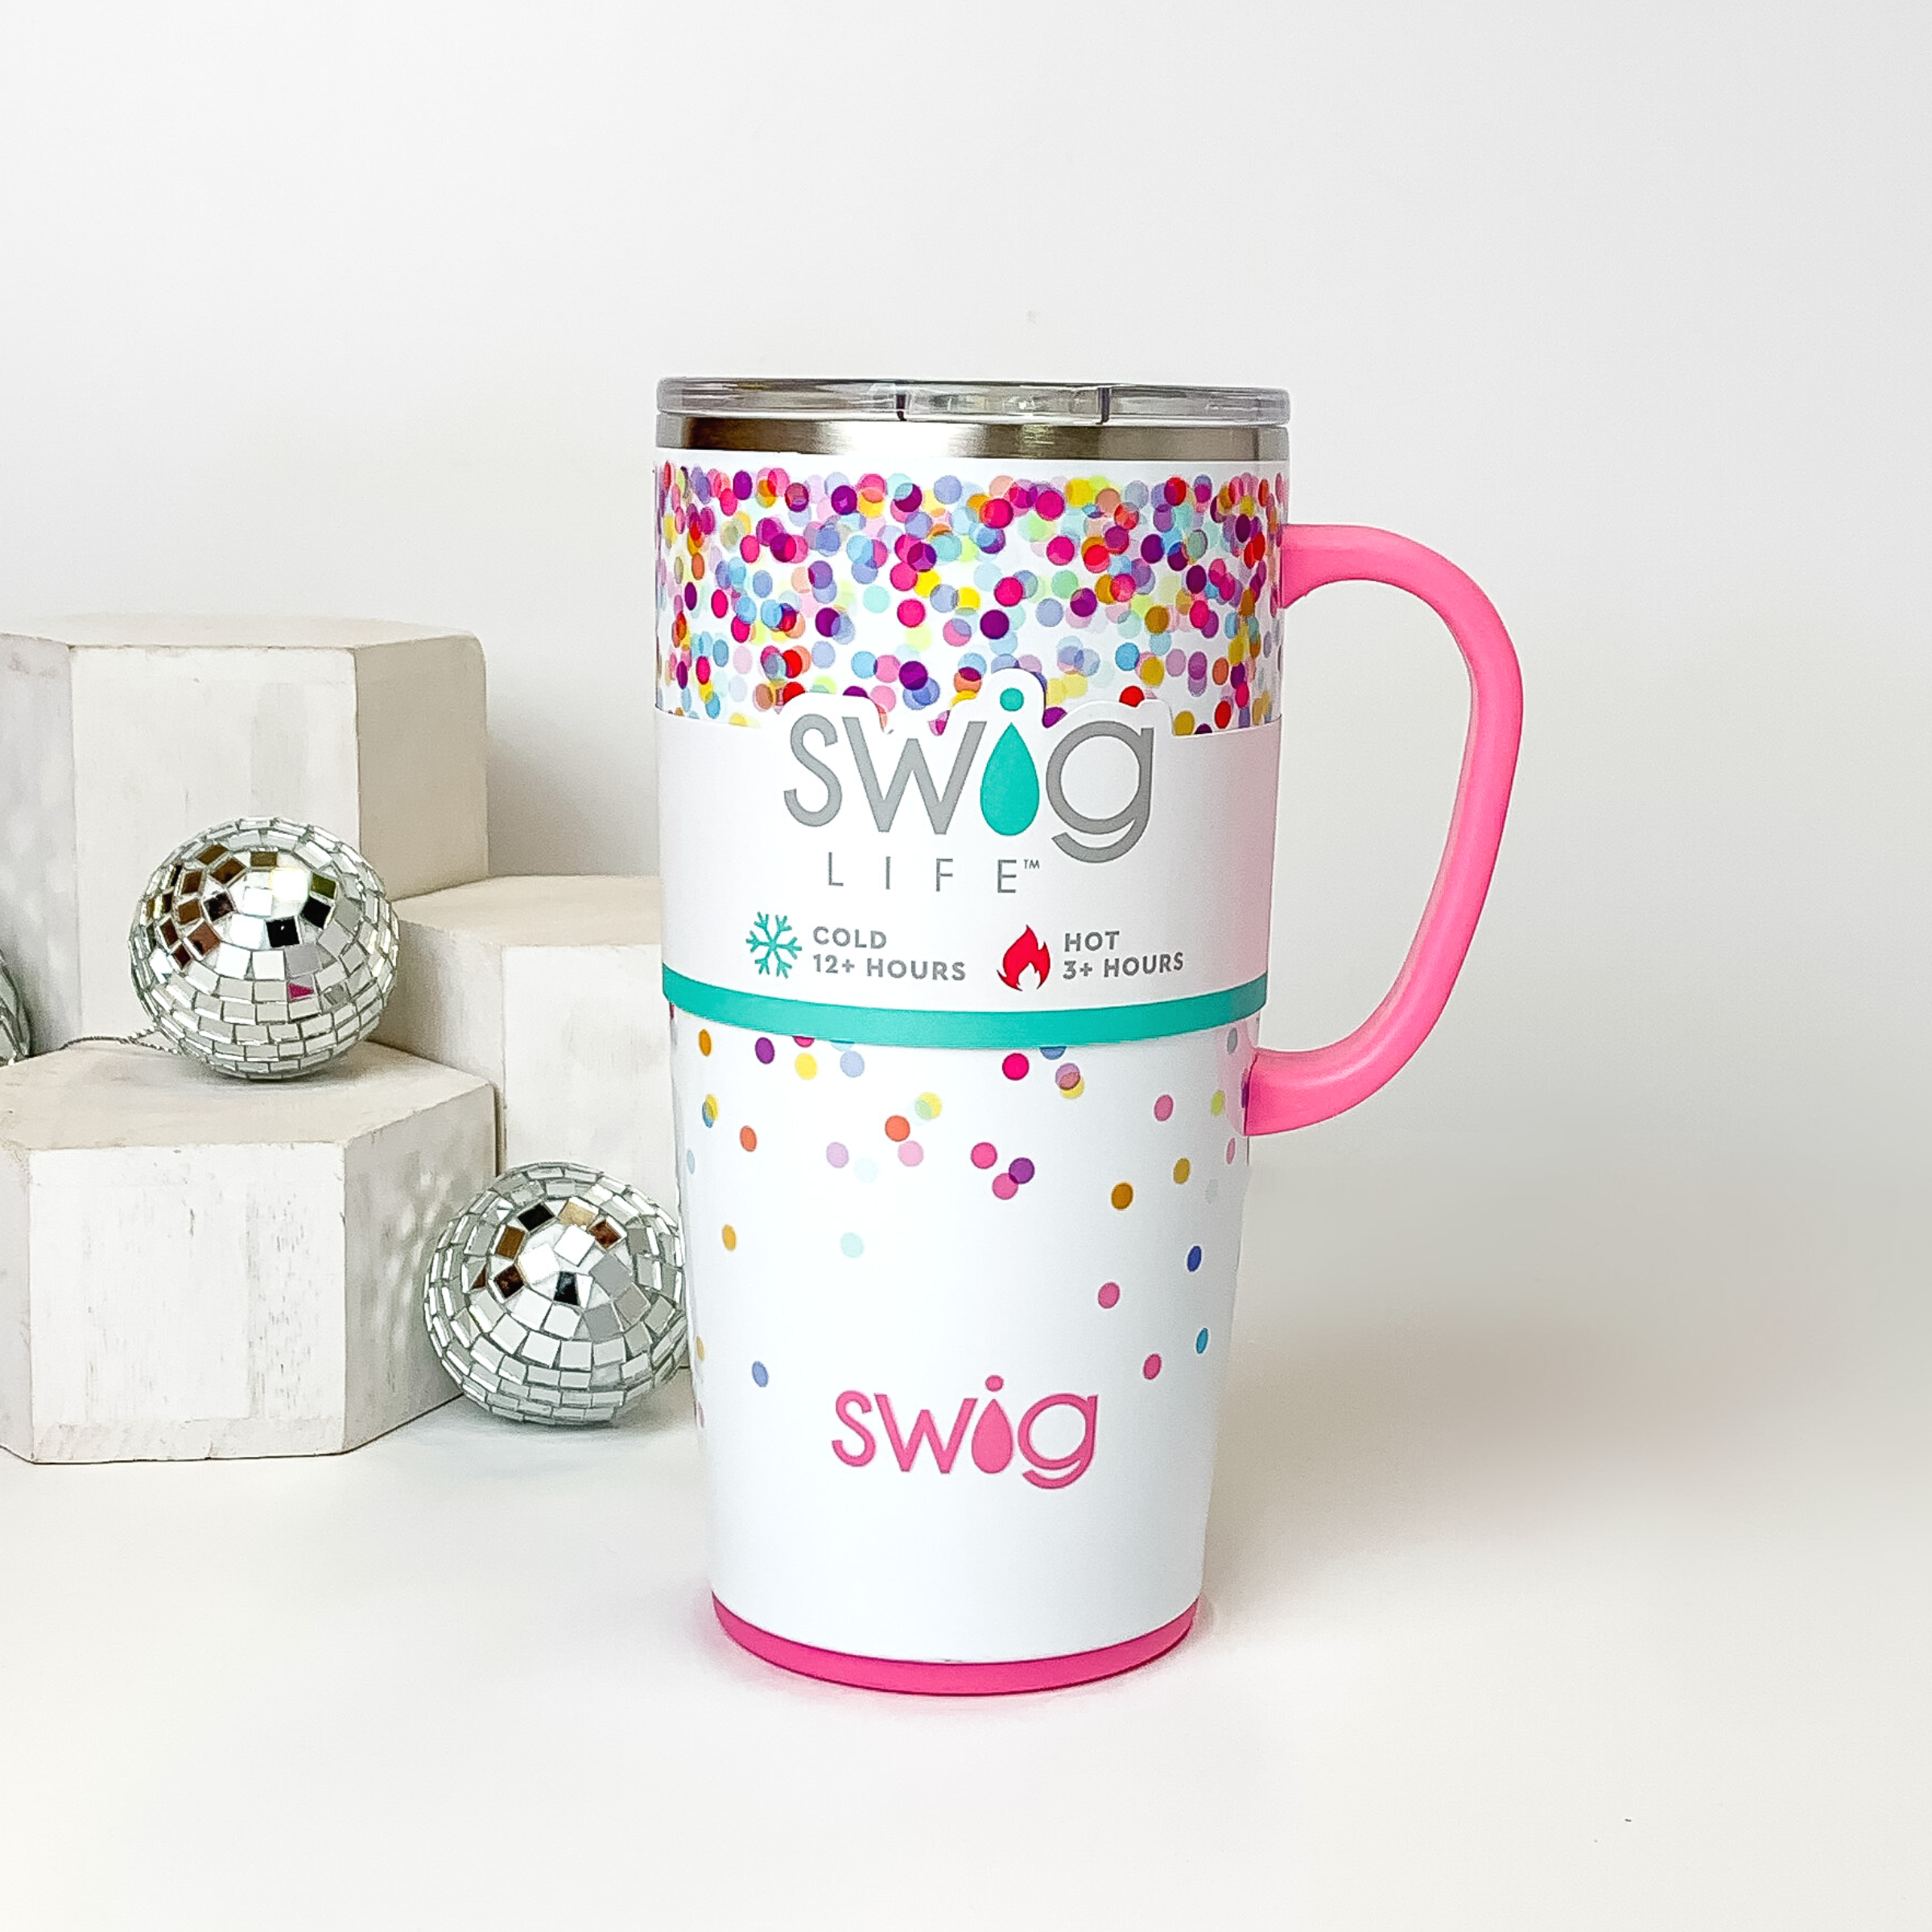 White mug with a clear lid and white handle. This mug has a multicolored confetti print. This mug is pictured on a white background with white blocks and disco balls on the left side of the picture. 